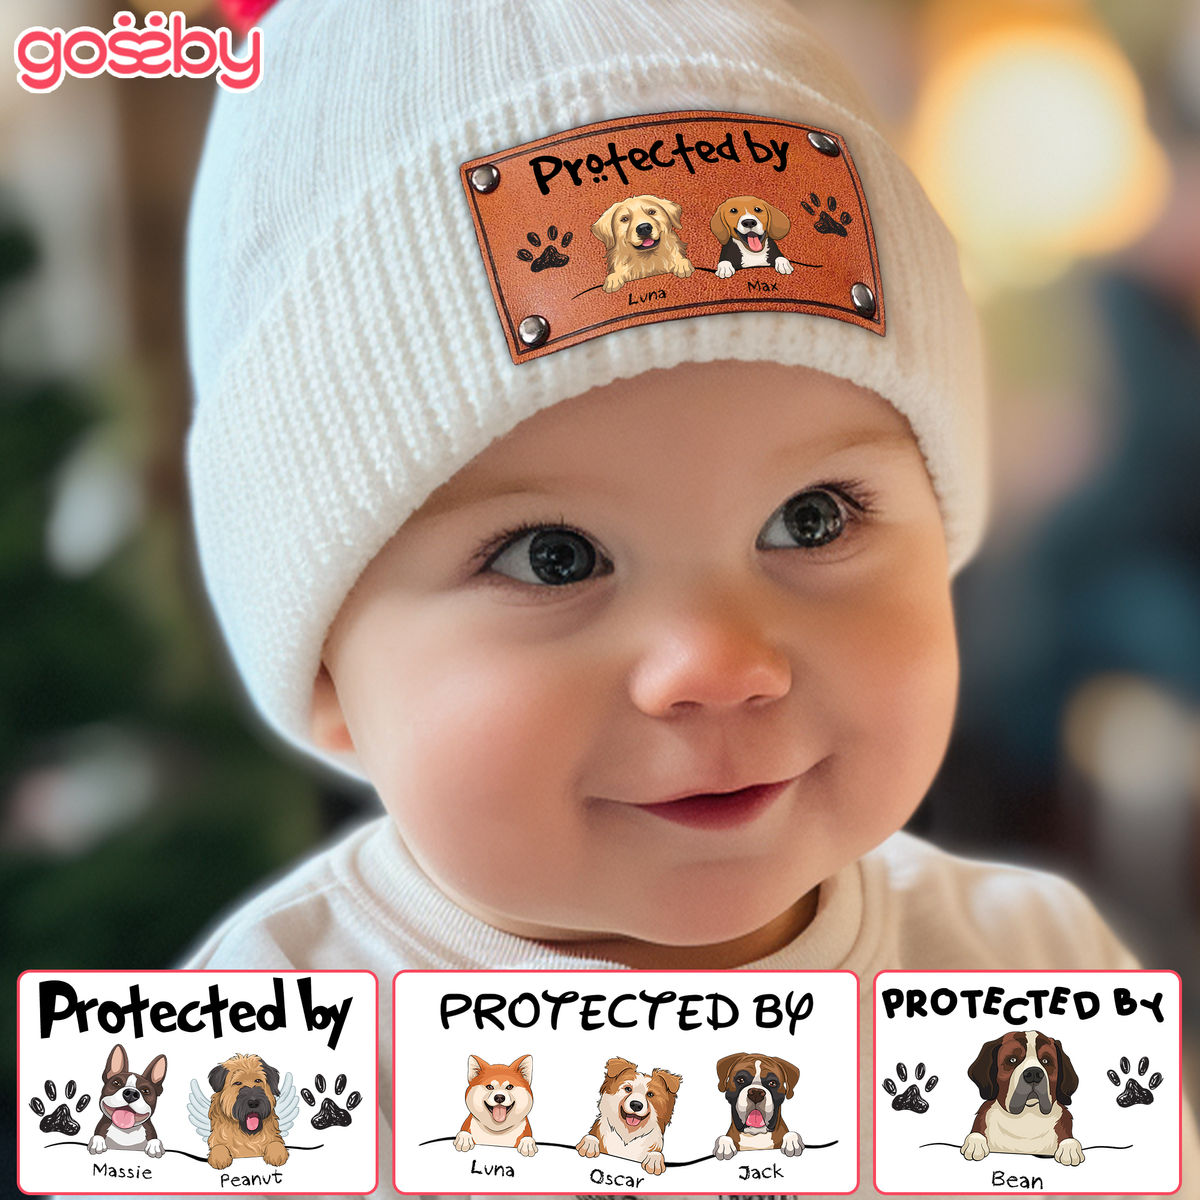 Custom Baby Beanie - Protected By Dog - Christmas Gift Baby (56566)